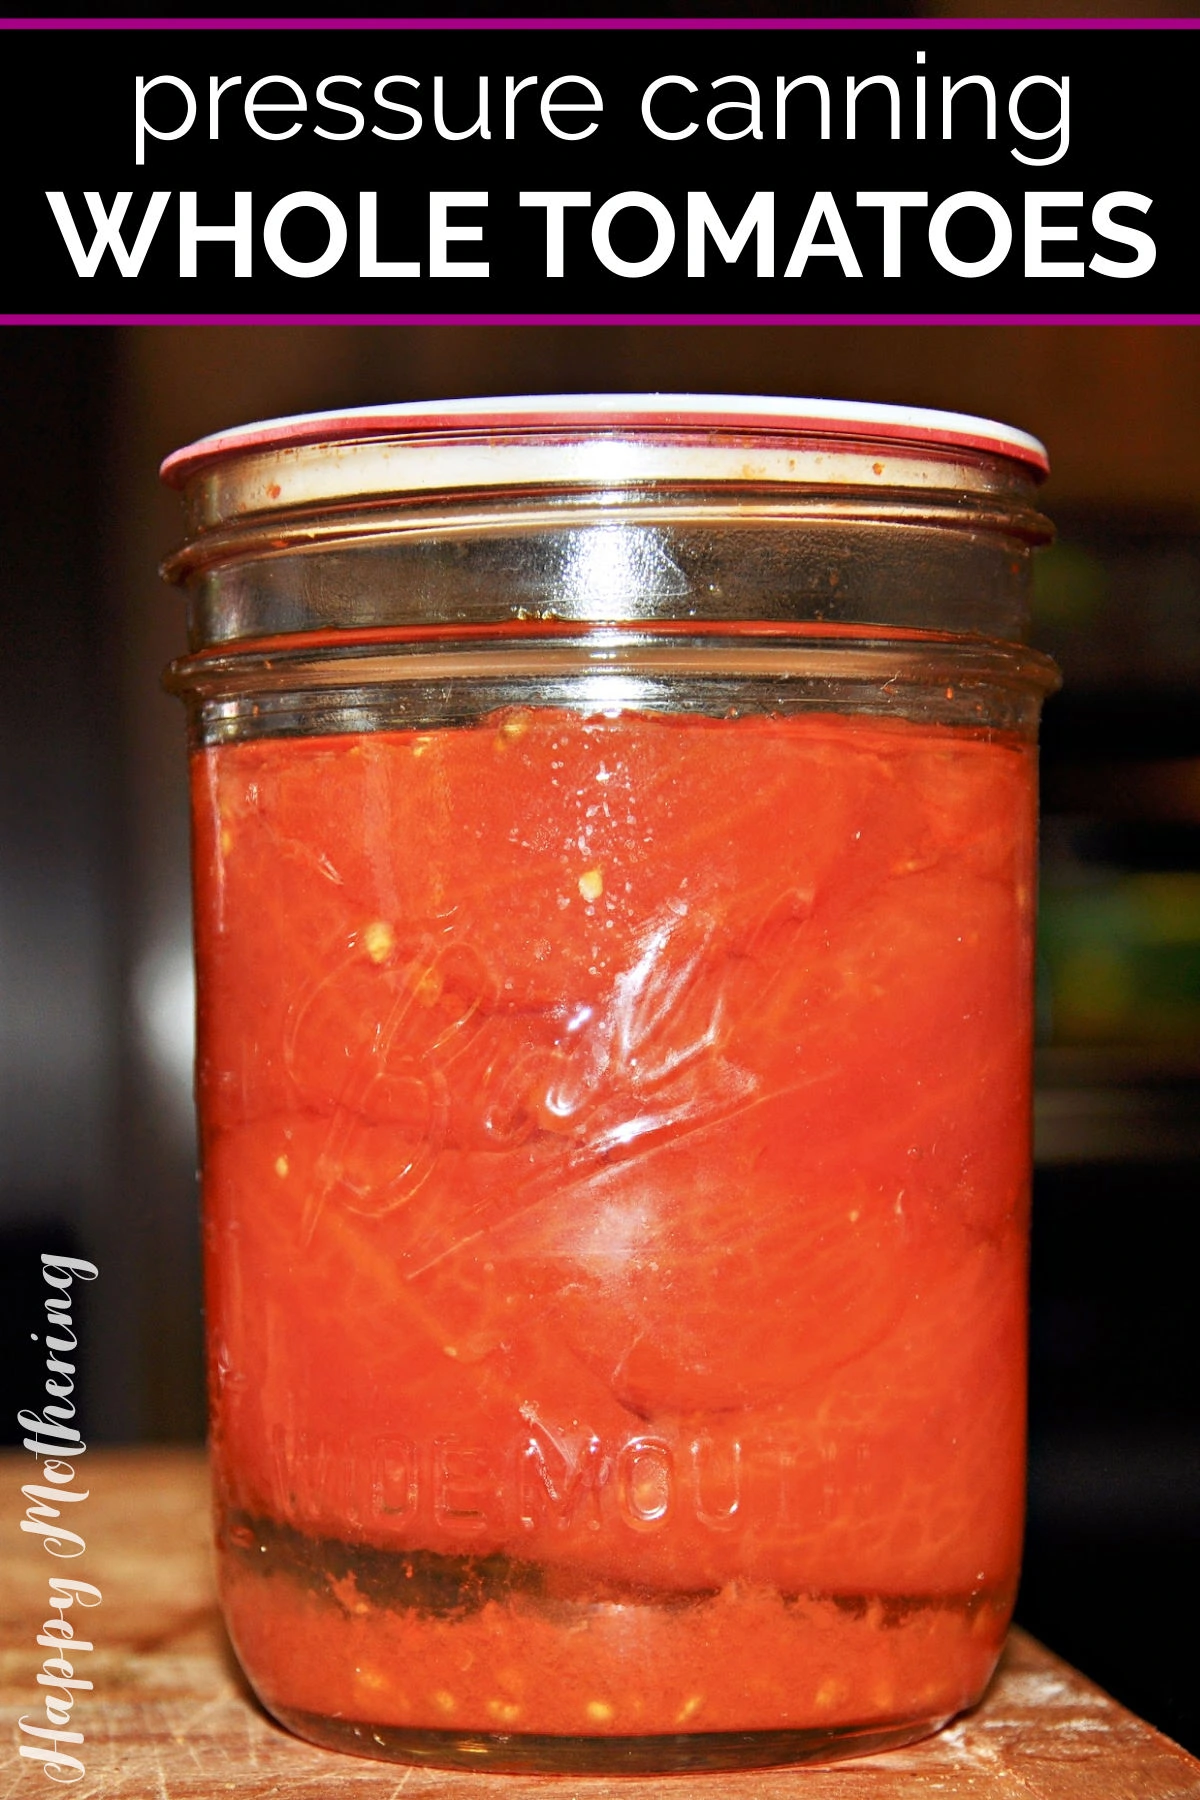 Pint of canned whole tomatoes from the garden.